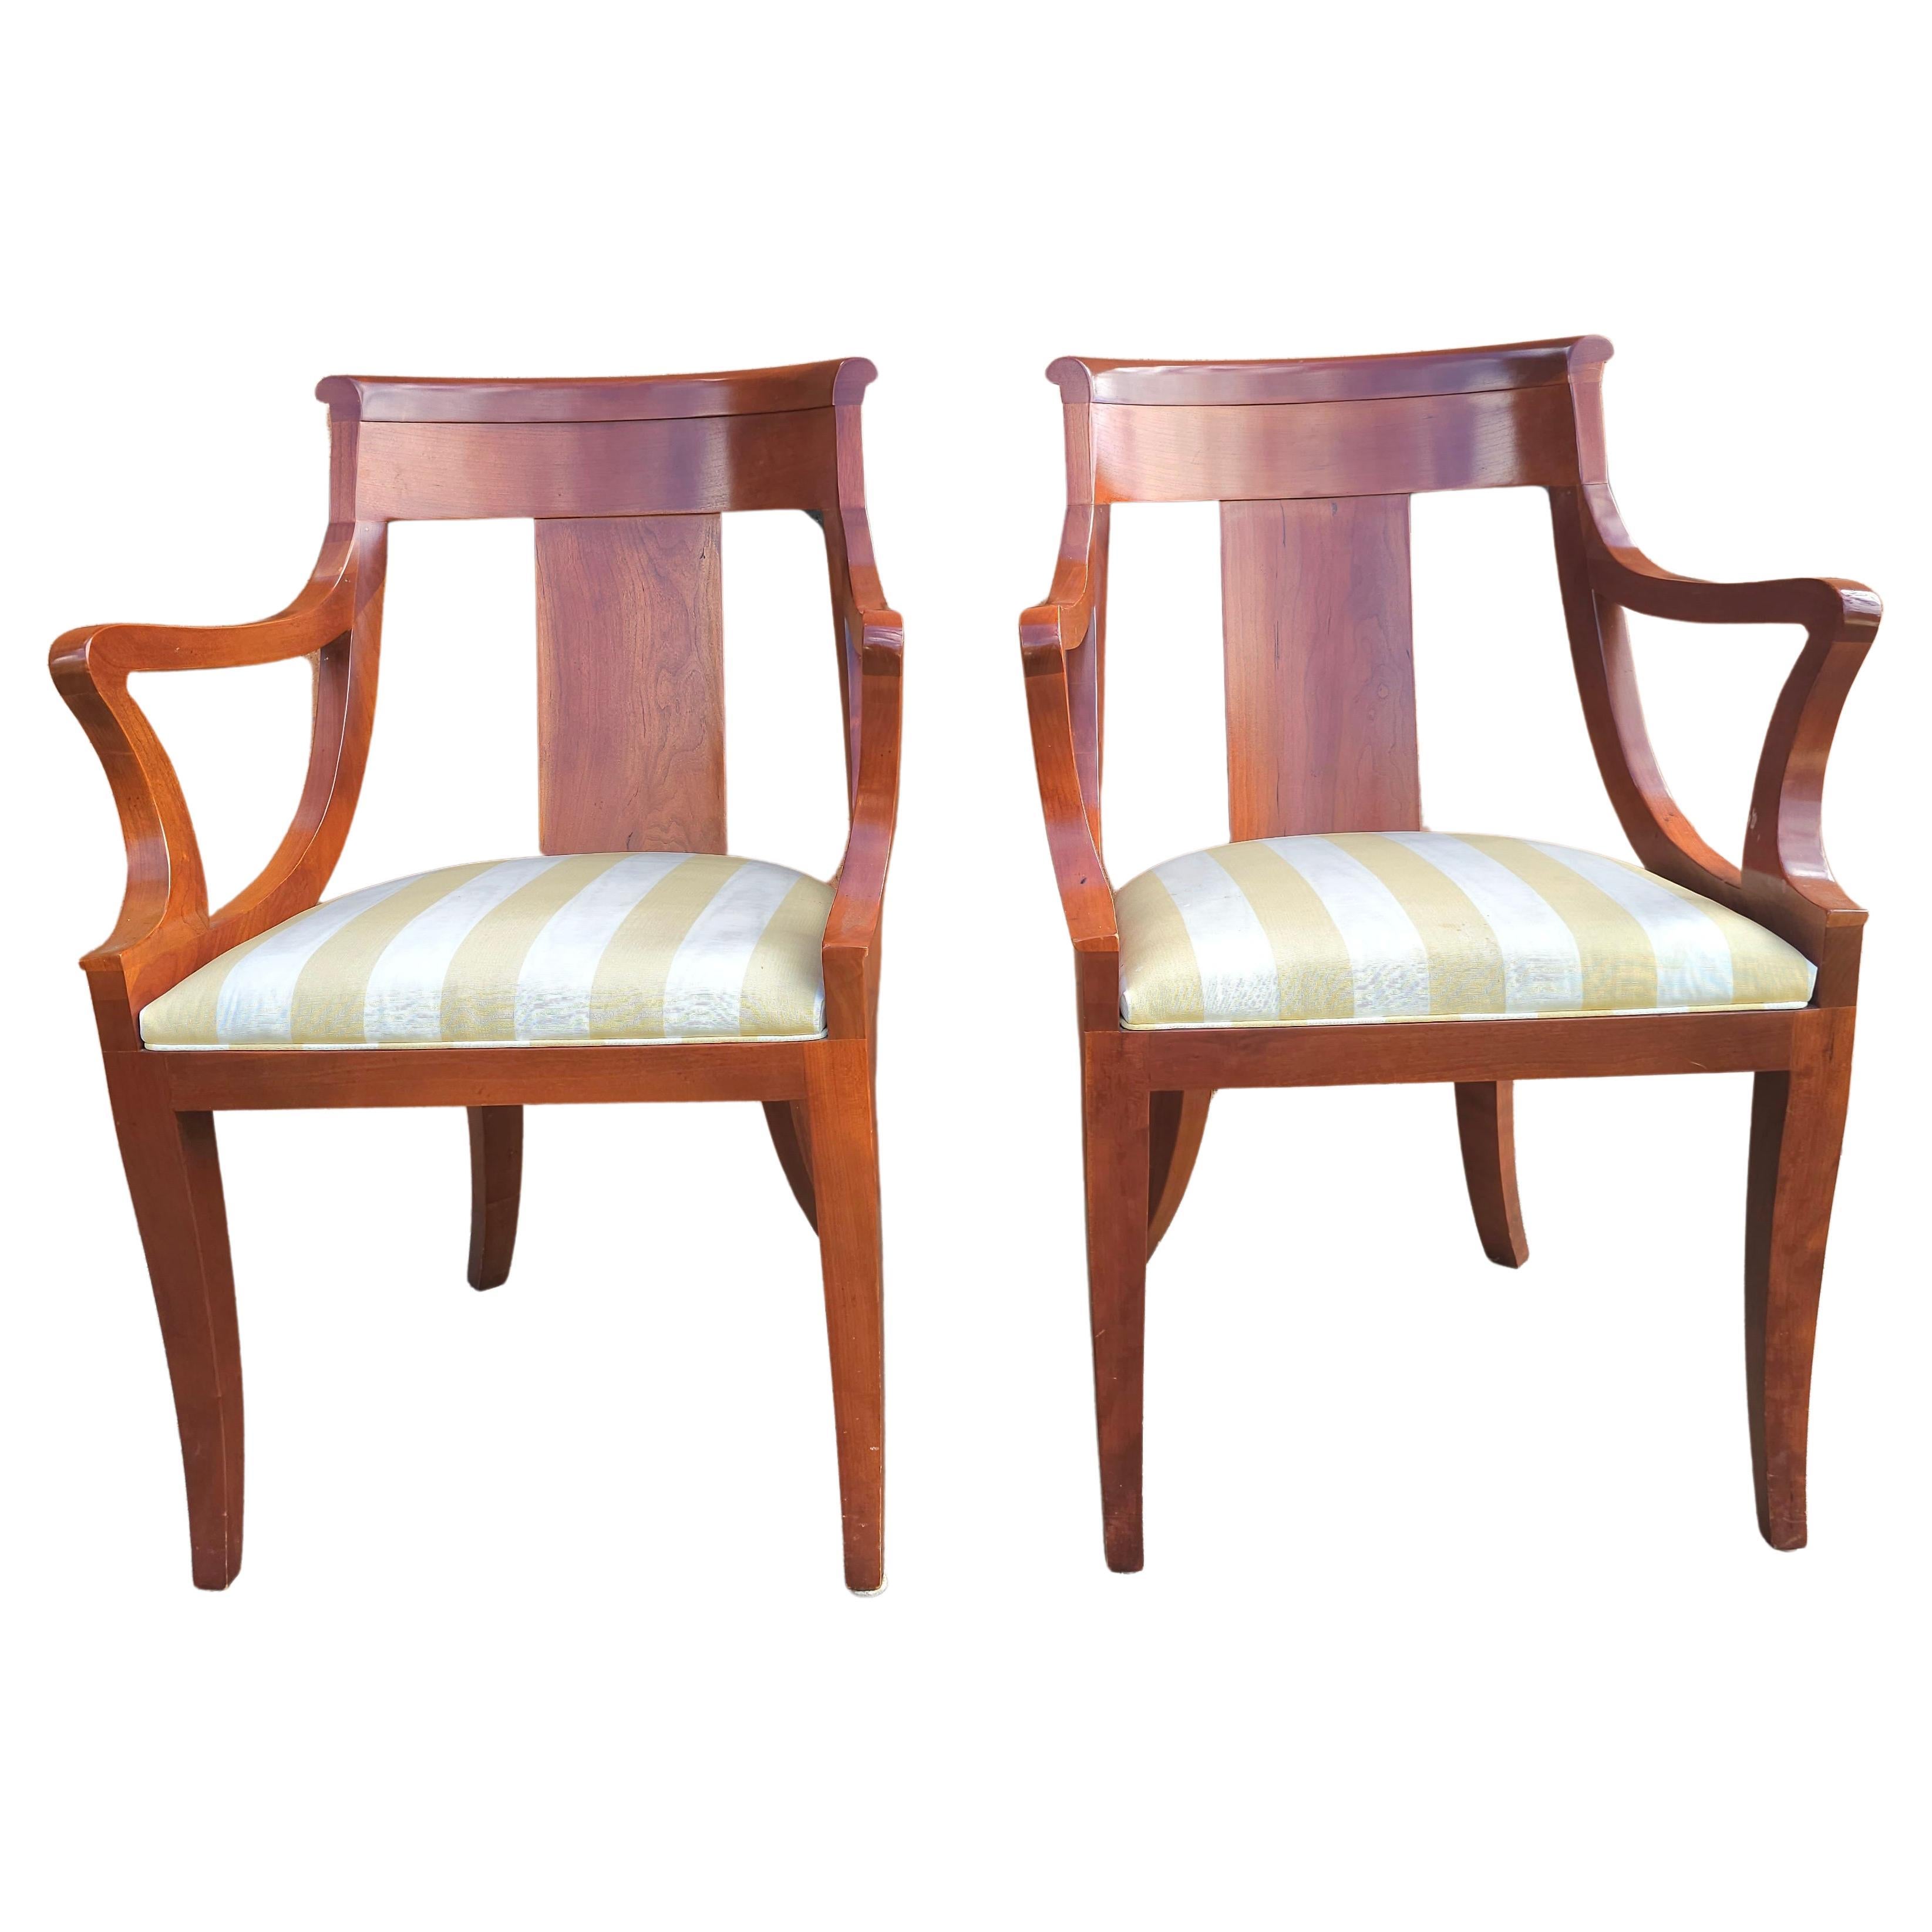 Pair of Baker Furniture Beidermeier Klismos Style Cherry Dining Chairs. A fantastic combination of the traditional Biedemeir and the Klismos styles chairs. This listing is for the pair and there 4 pairs available, 3 pairs of side  chairs and a pair